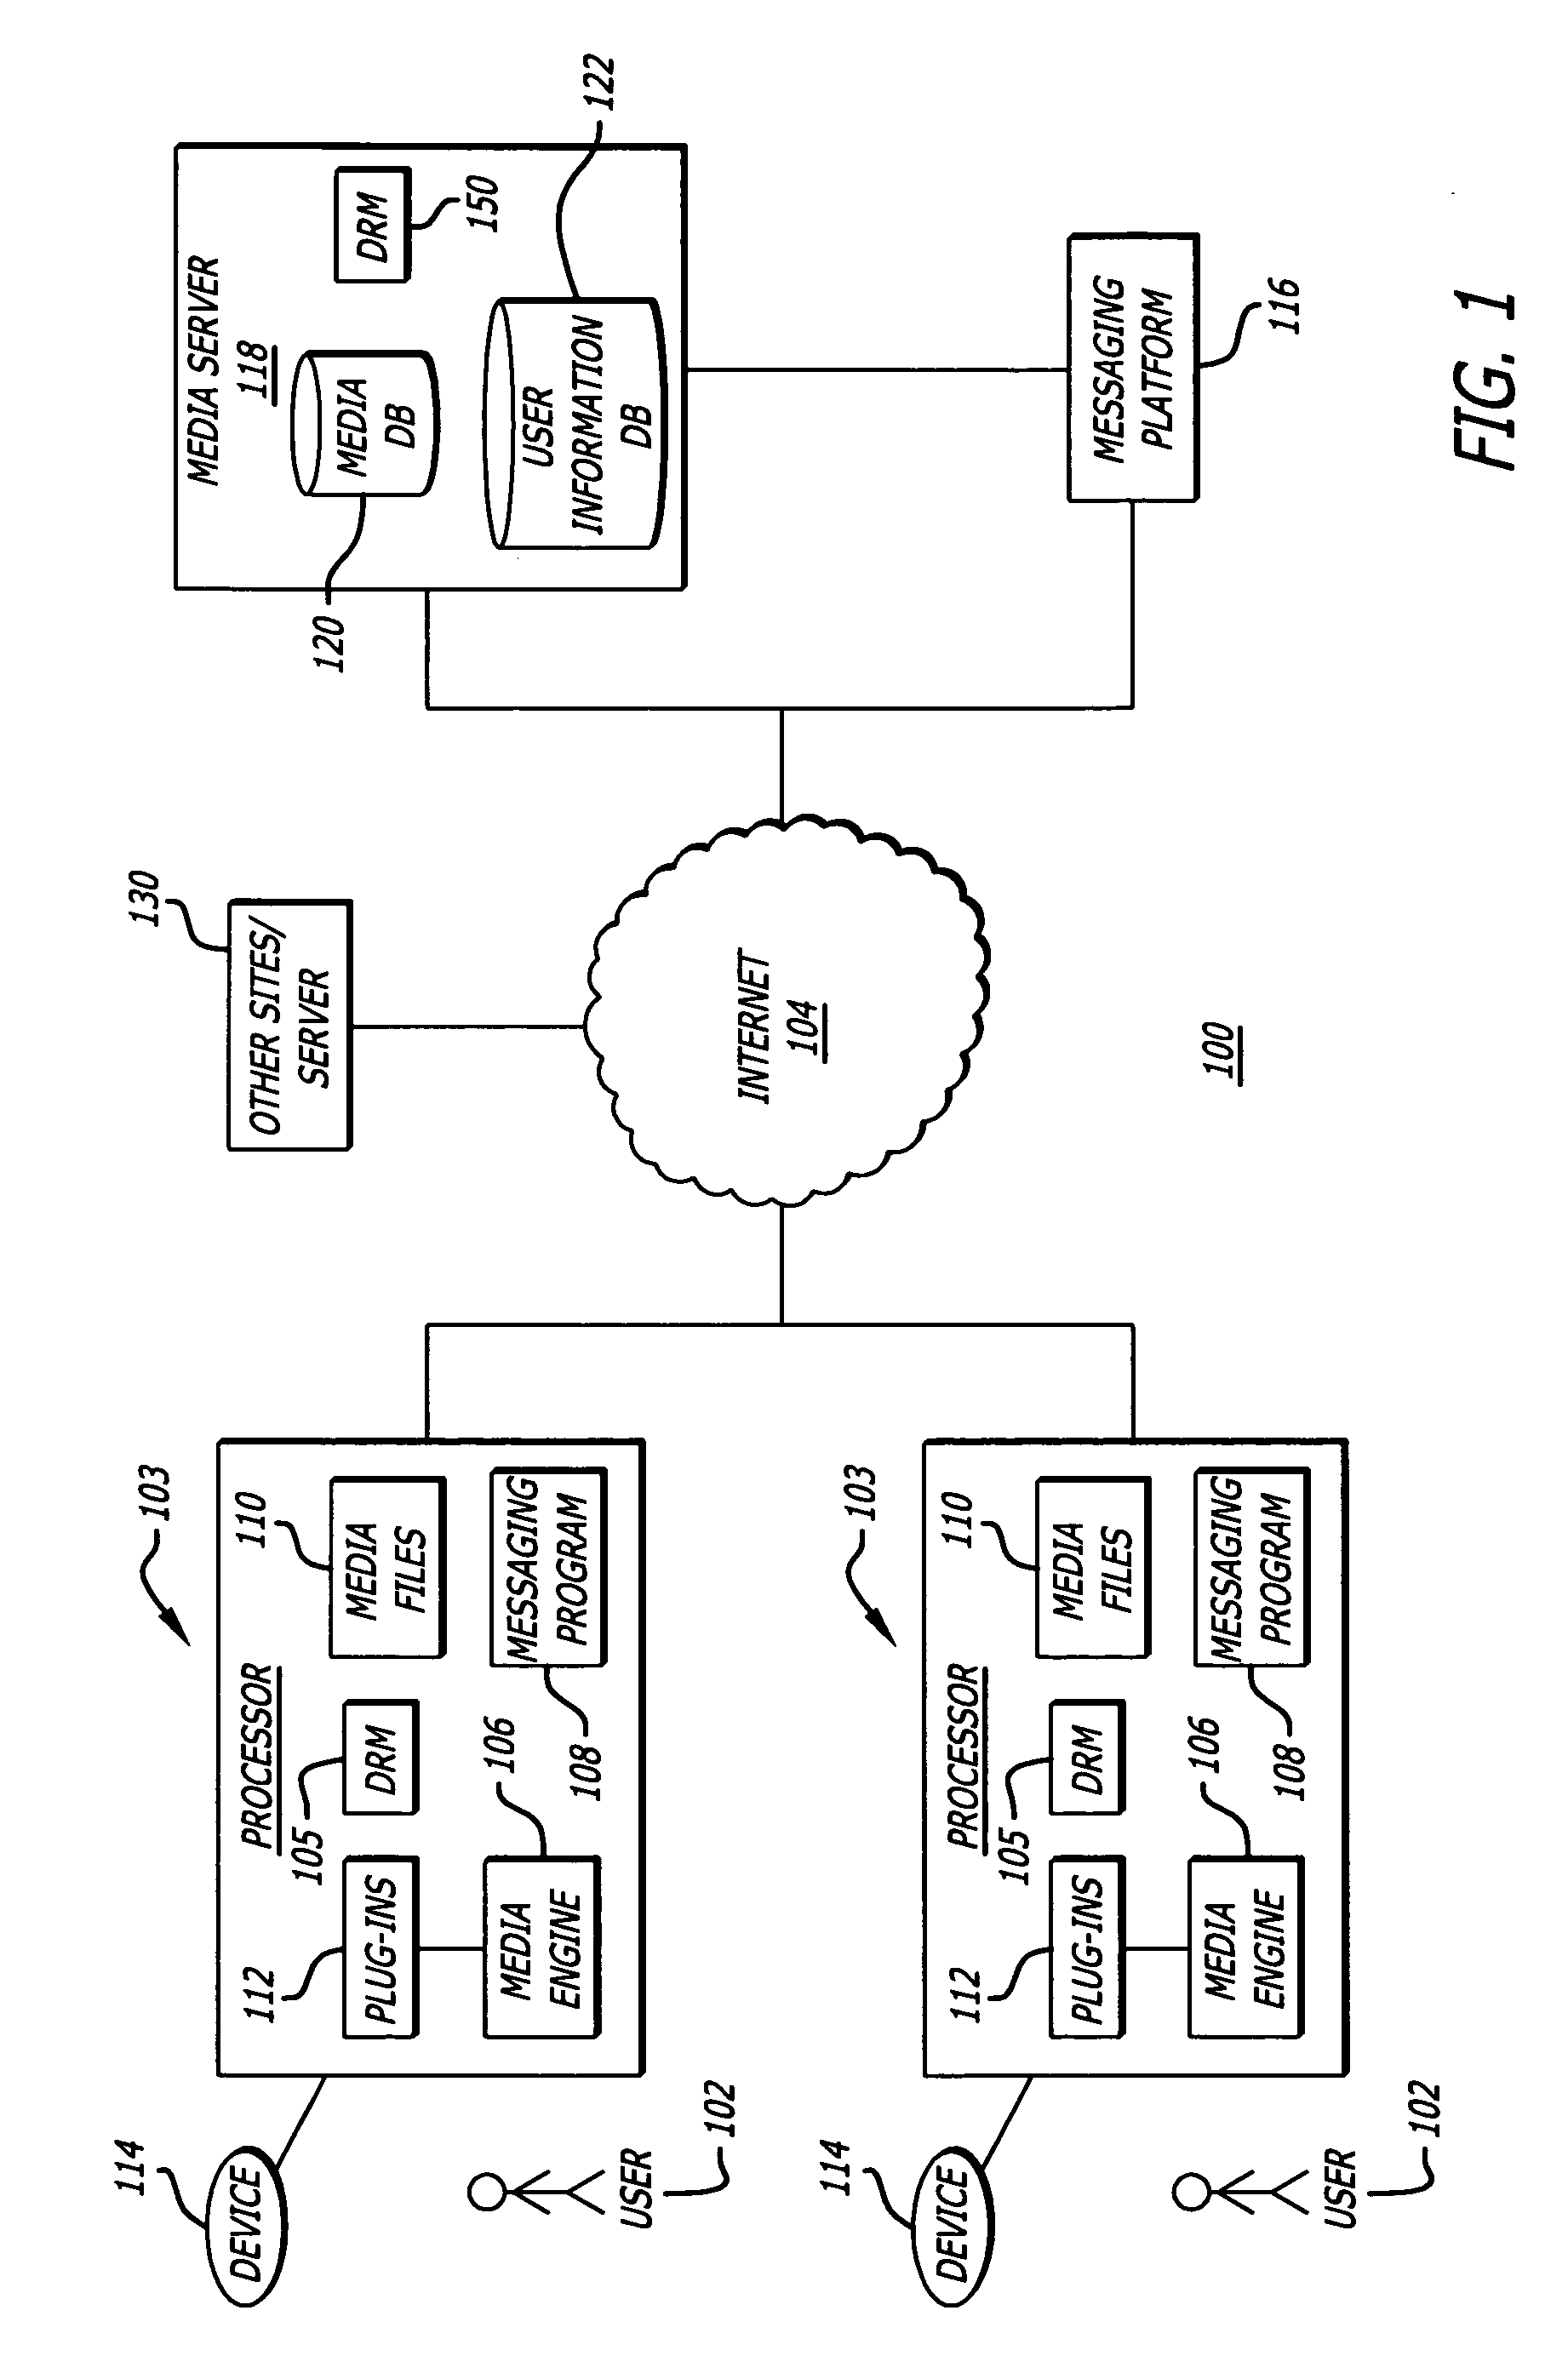 System and method for networked media access